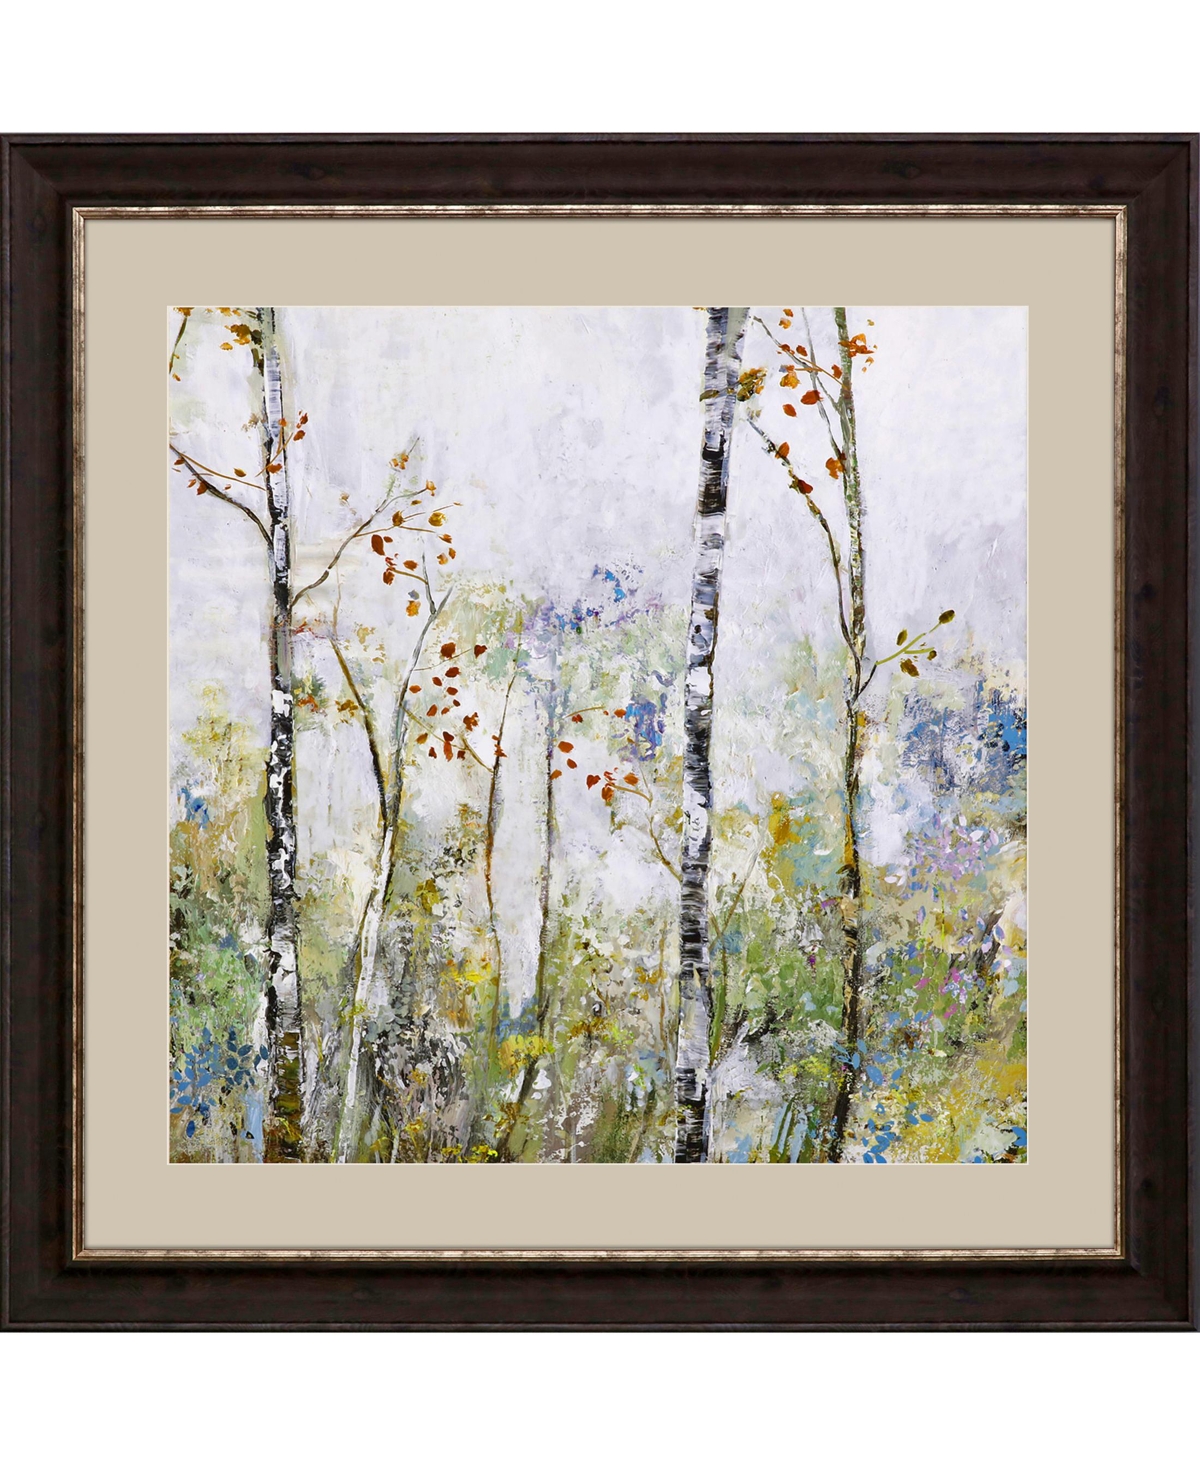 Paragon Picture Gallery Birch Forest Ii Framed Art In Green